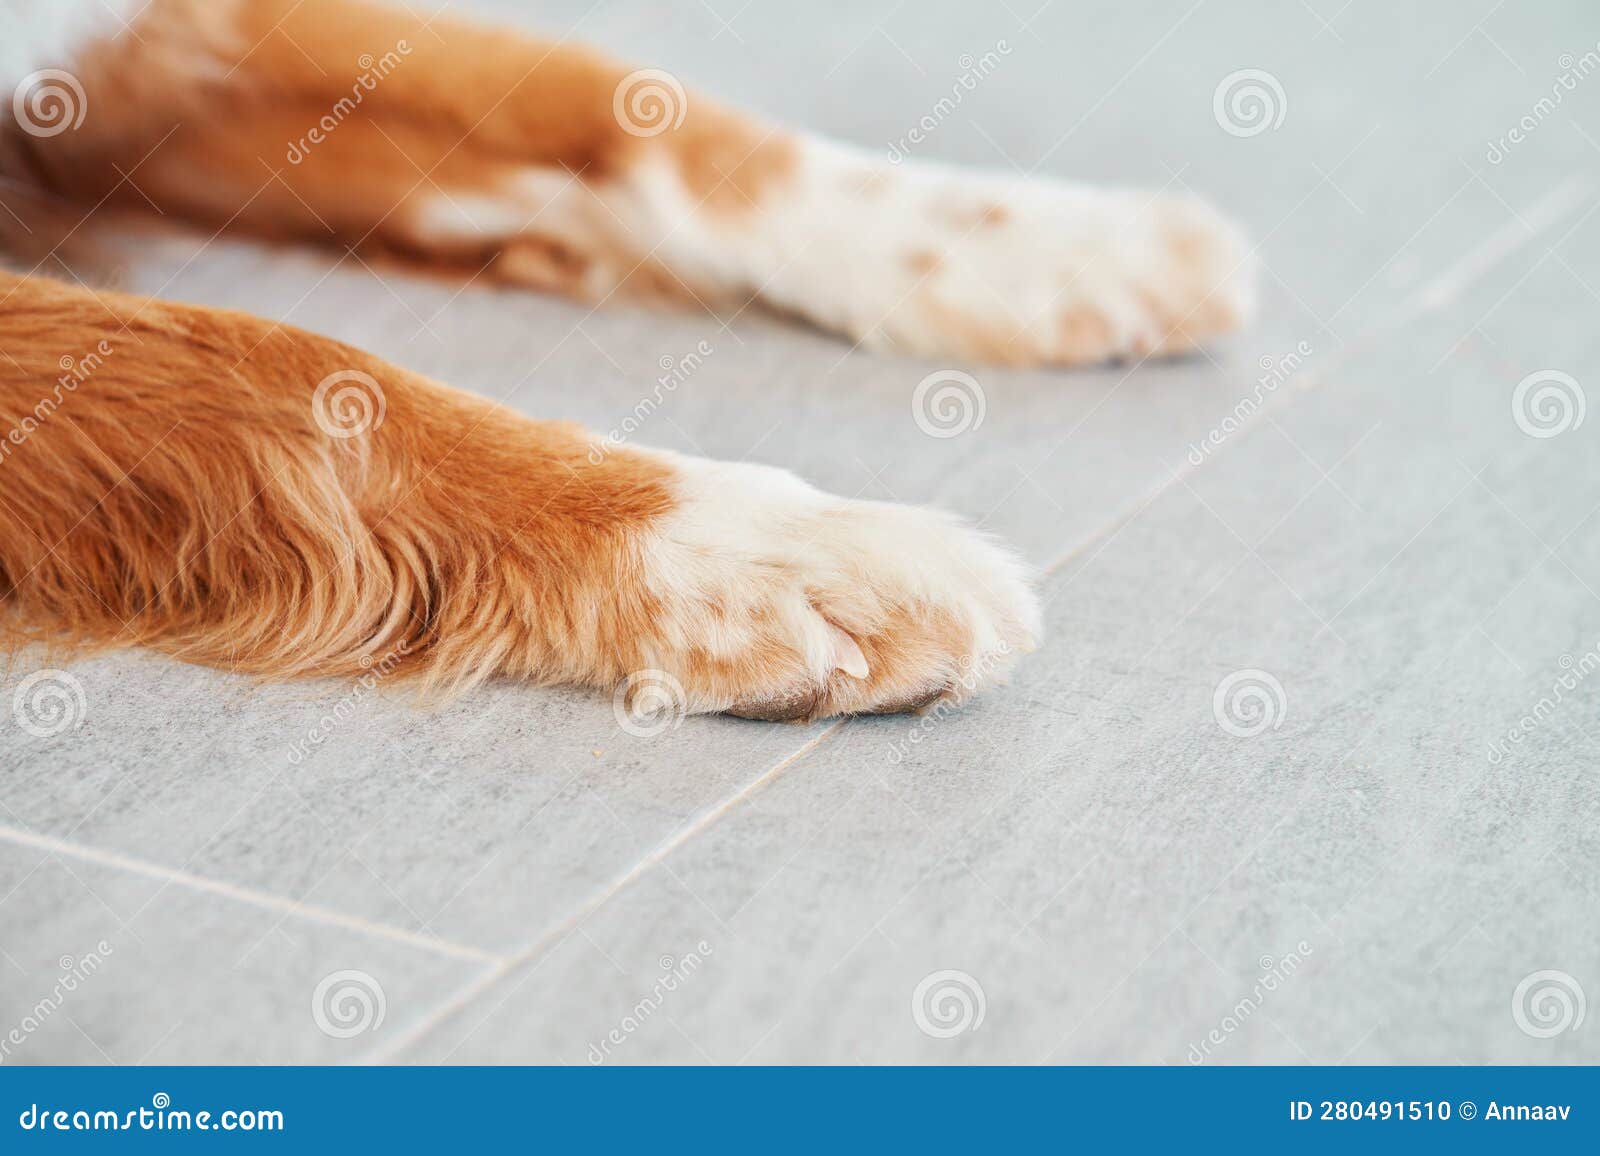 red - white dog paw. close-up